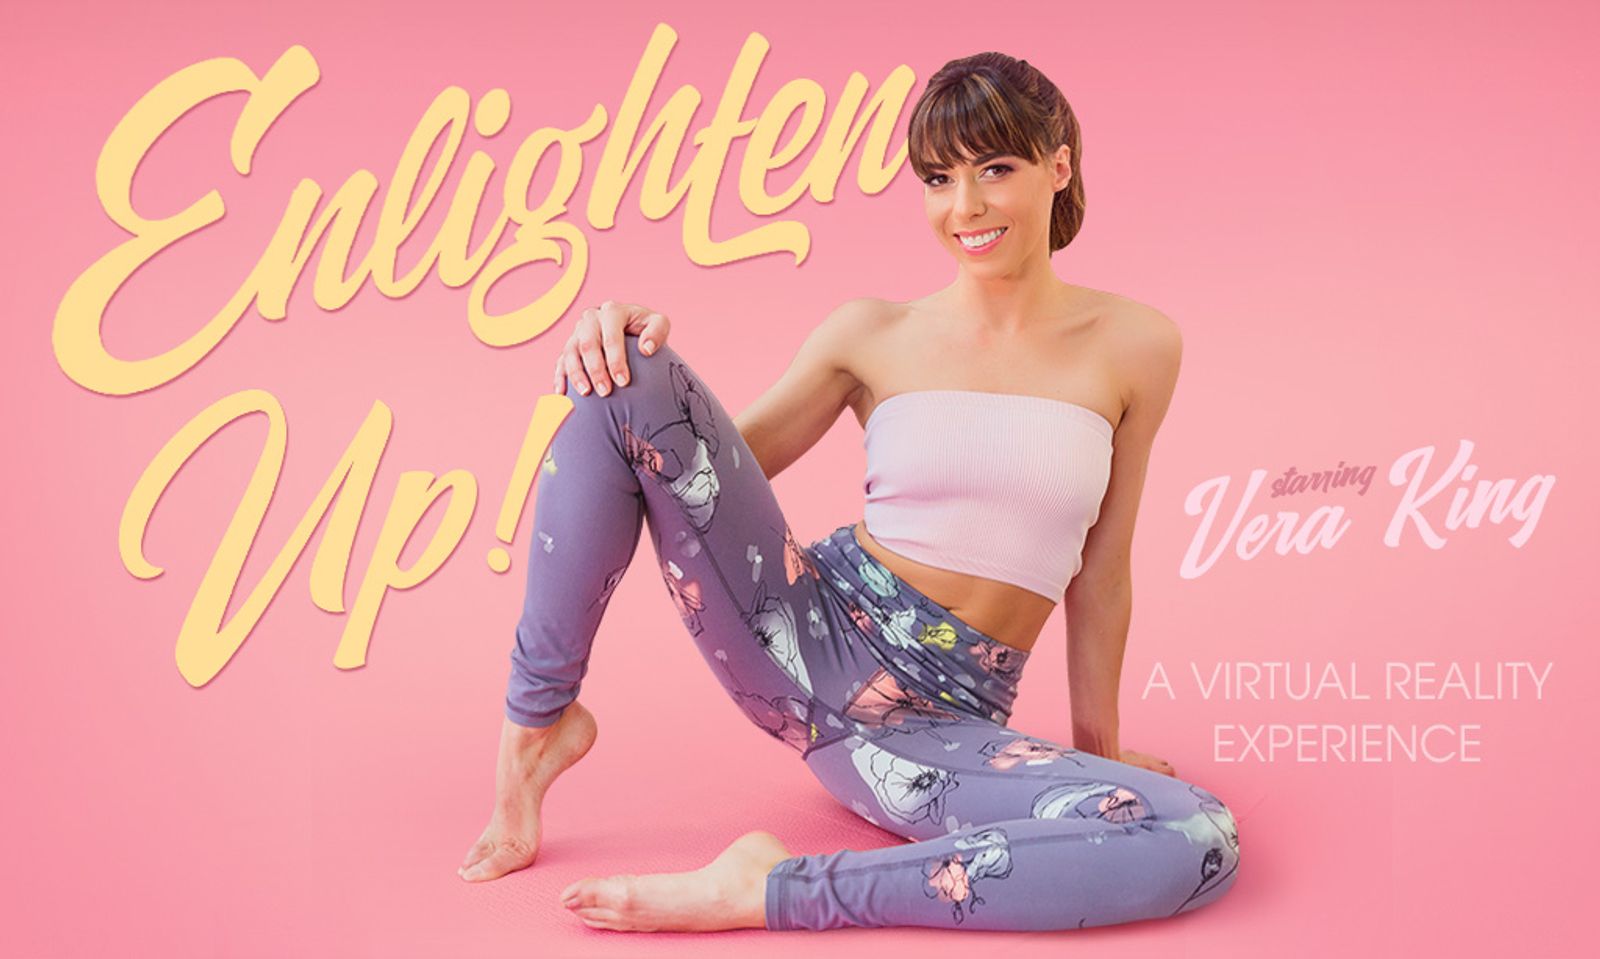 Virtually Relax and “Enlighten Up!” with Vera King